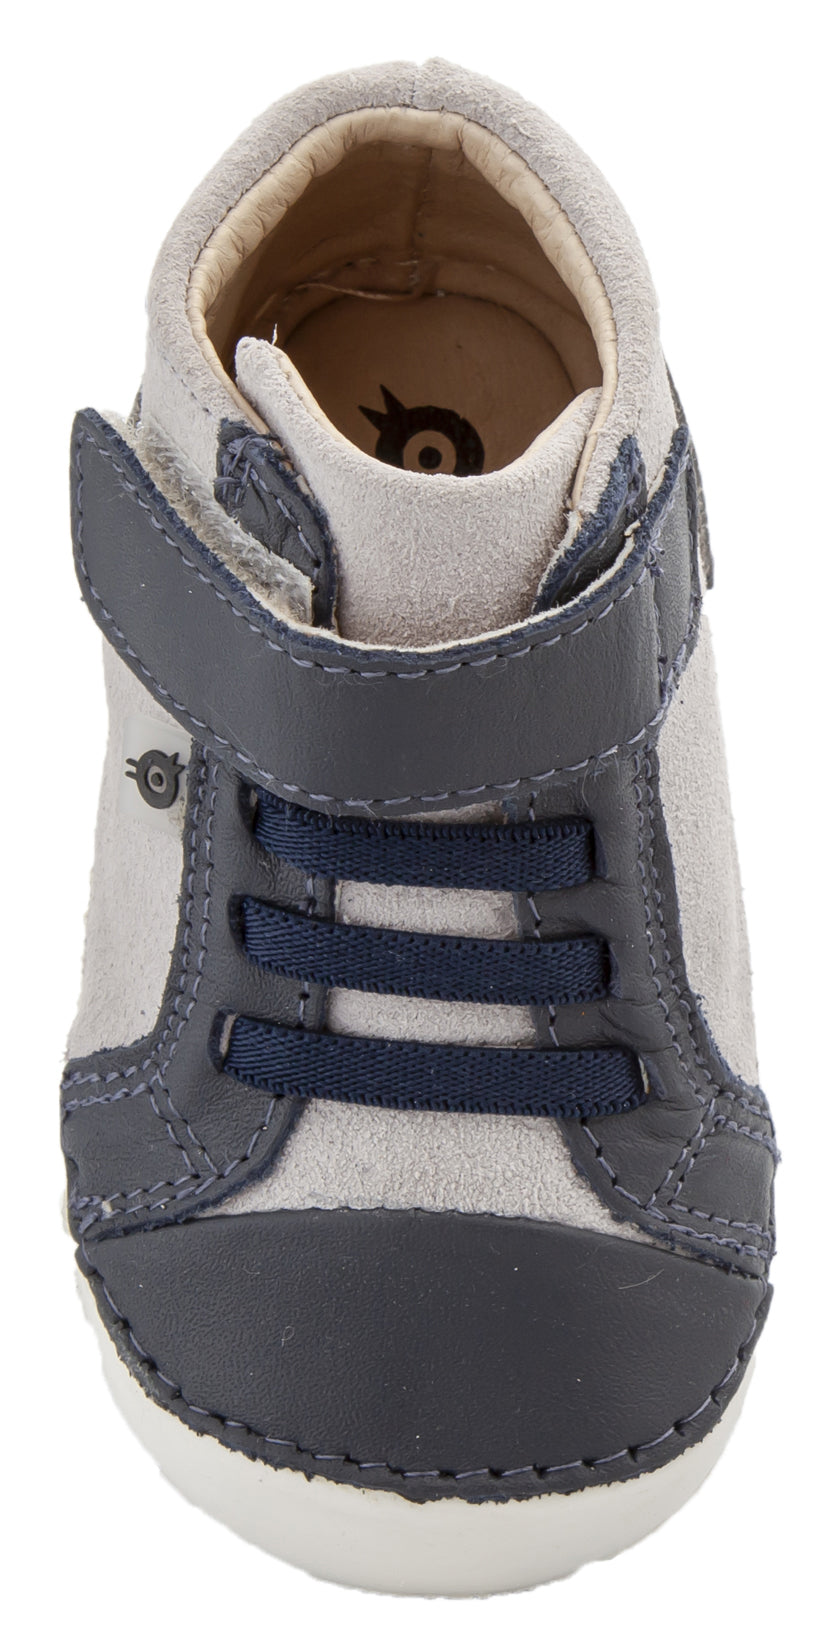 Old Soles Girl's & Boy's High Pave Sneakers - Navy/Grey/Grey Suede